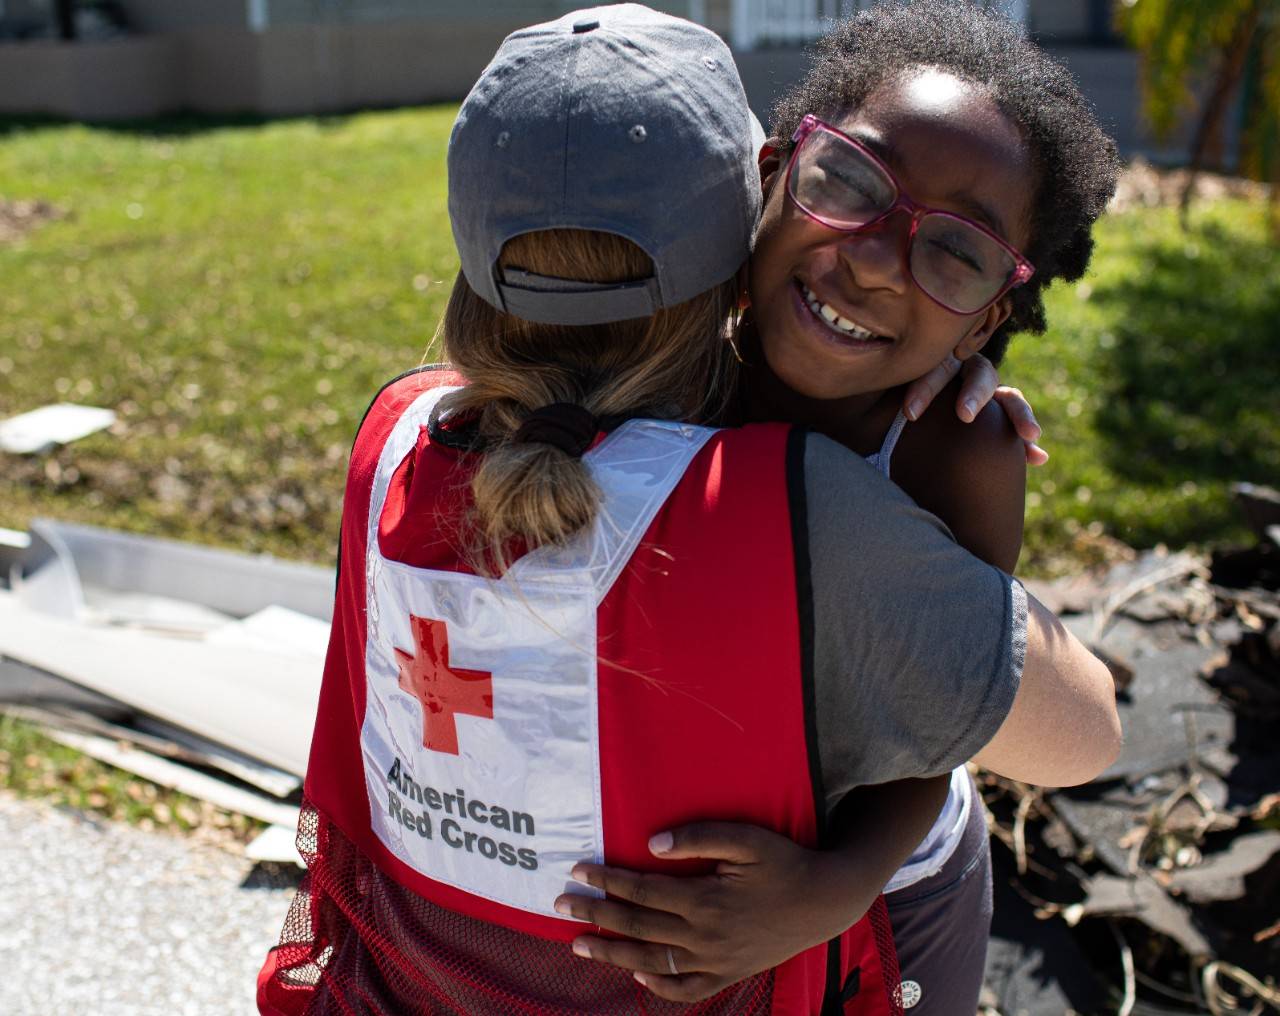 October 7, 2022. Punta Gorda, Florida.Red Cross disaster relief worker Lynette Nyman gets a hug from darling Ava who evacuated to her grandmother’s home to be safe from Hurricane Ian. Photo by Marko Kokic/American Red Cross